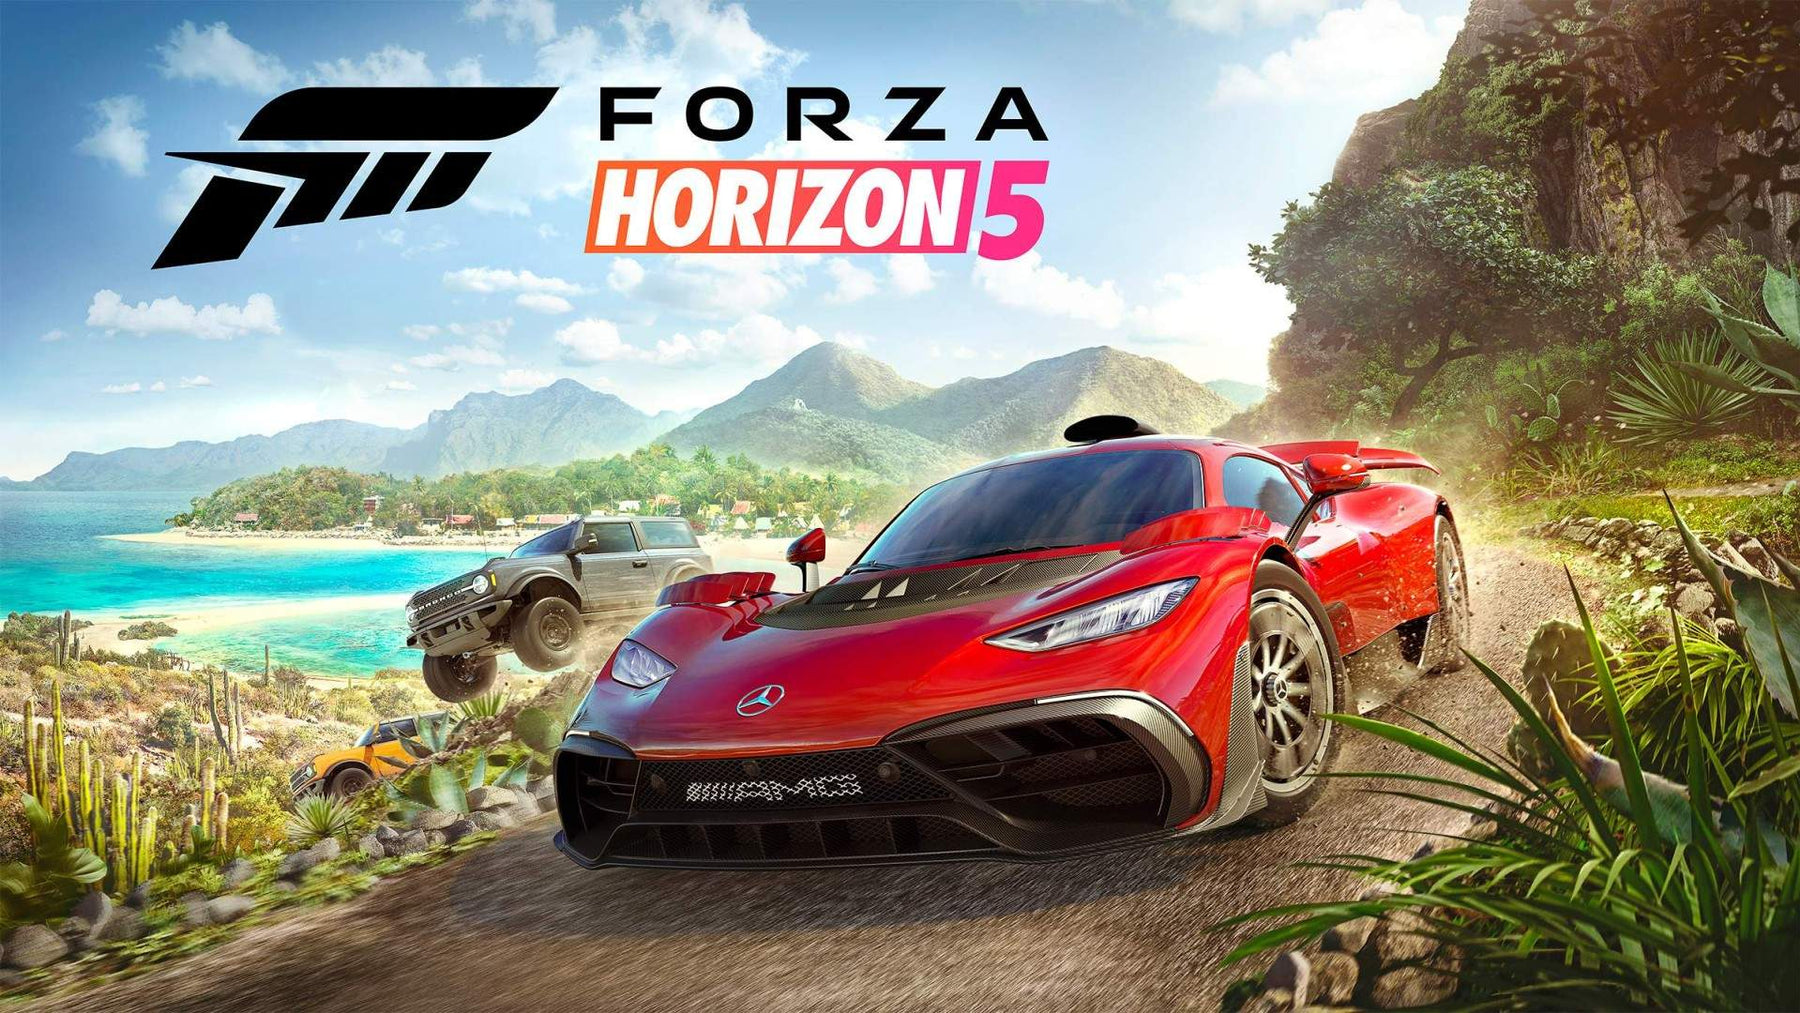 Forza Horizon 5 Review - Our Thoughts